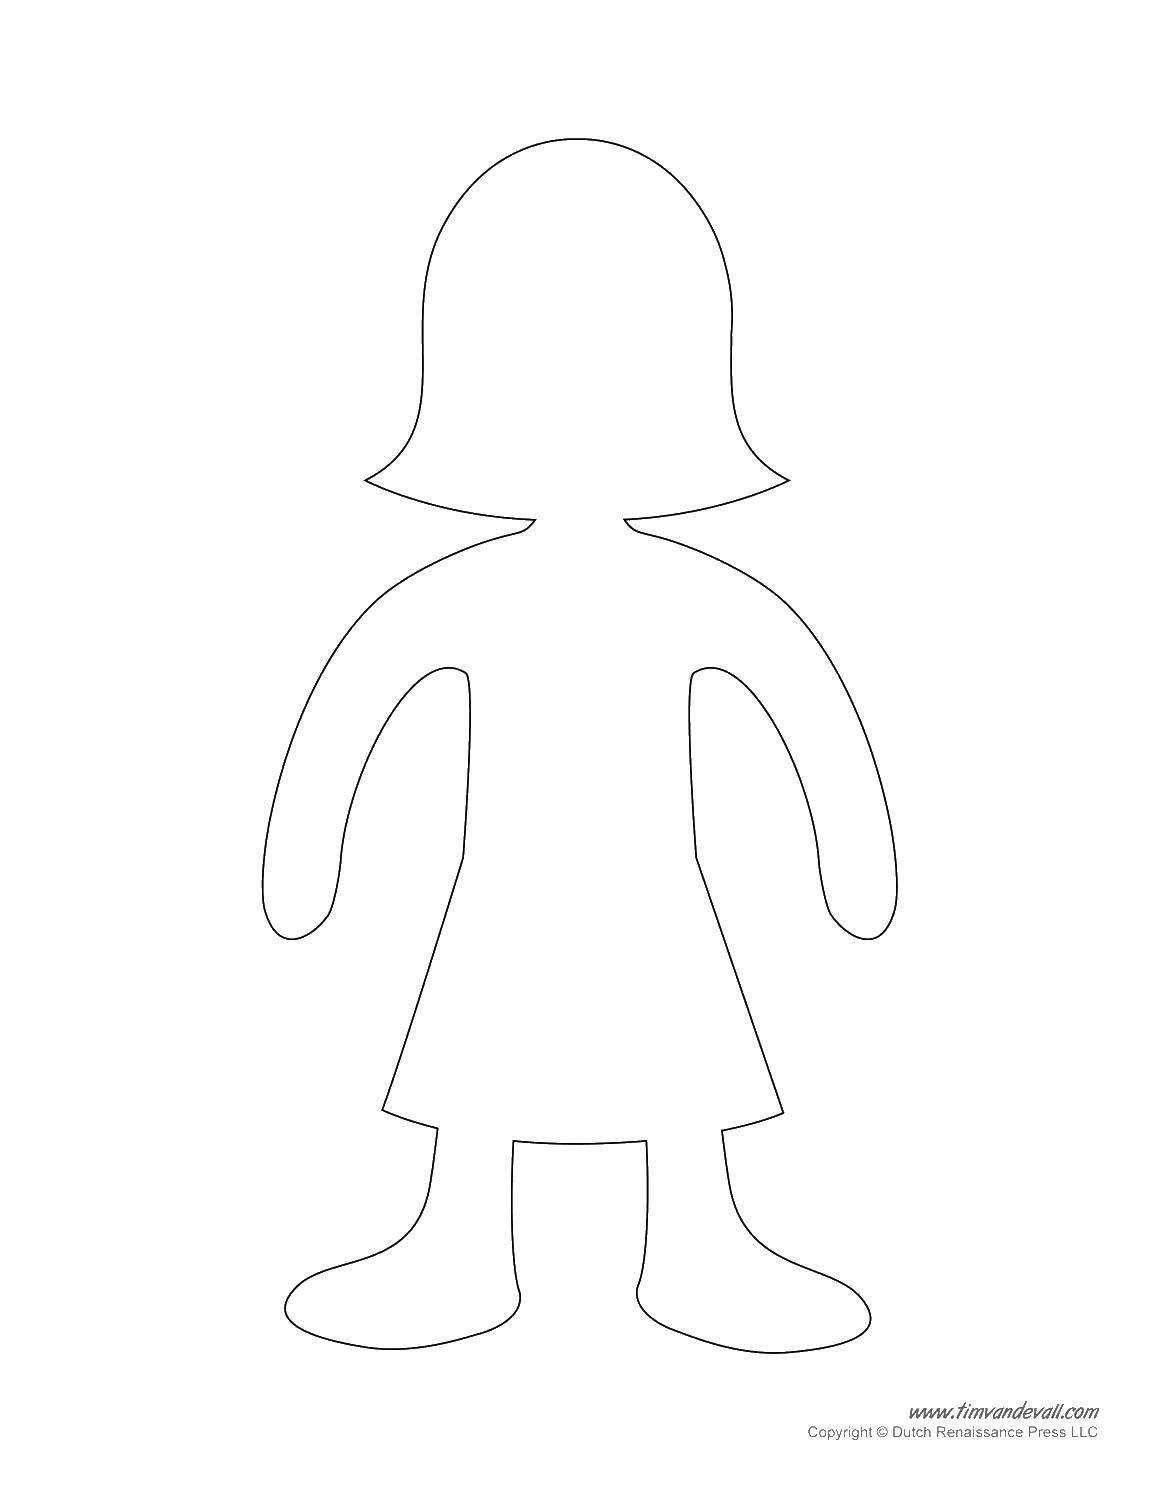 Coloring The outline of the pupa. Category The contour of the doll . Tags:  Doll, contour.